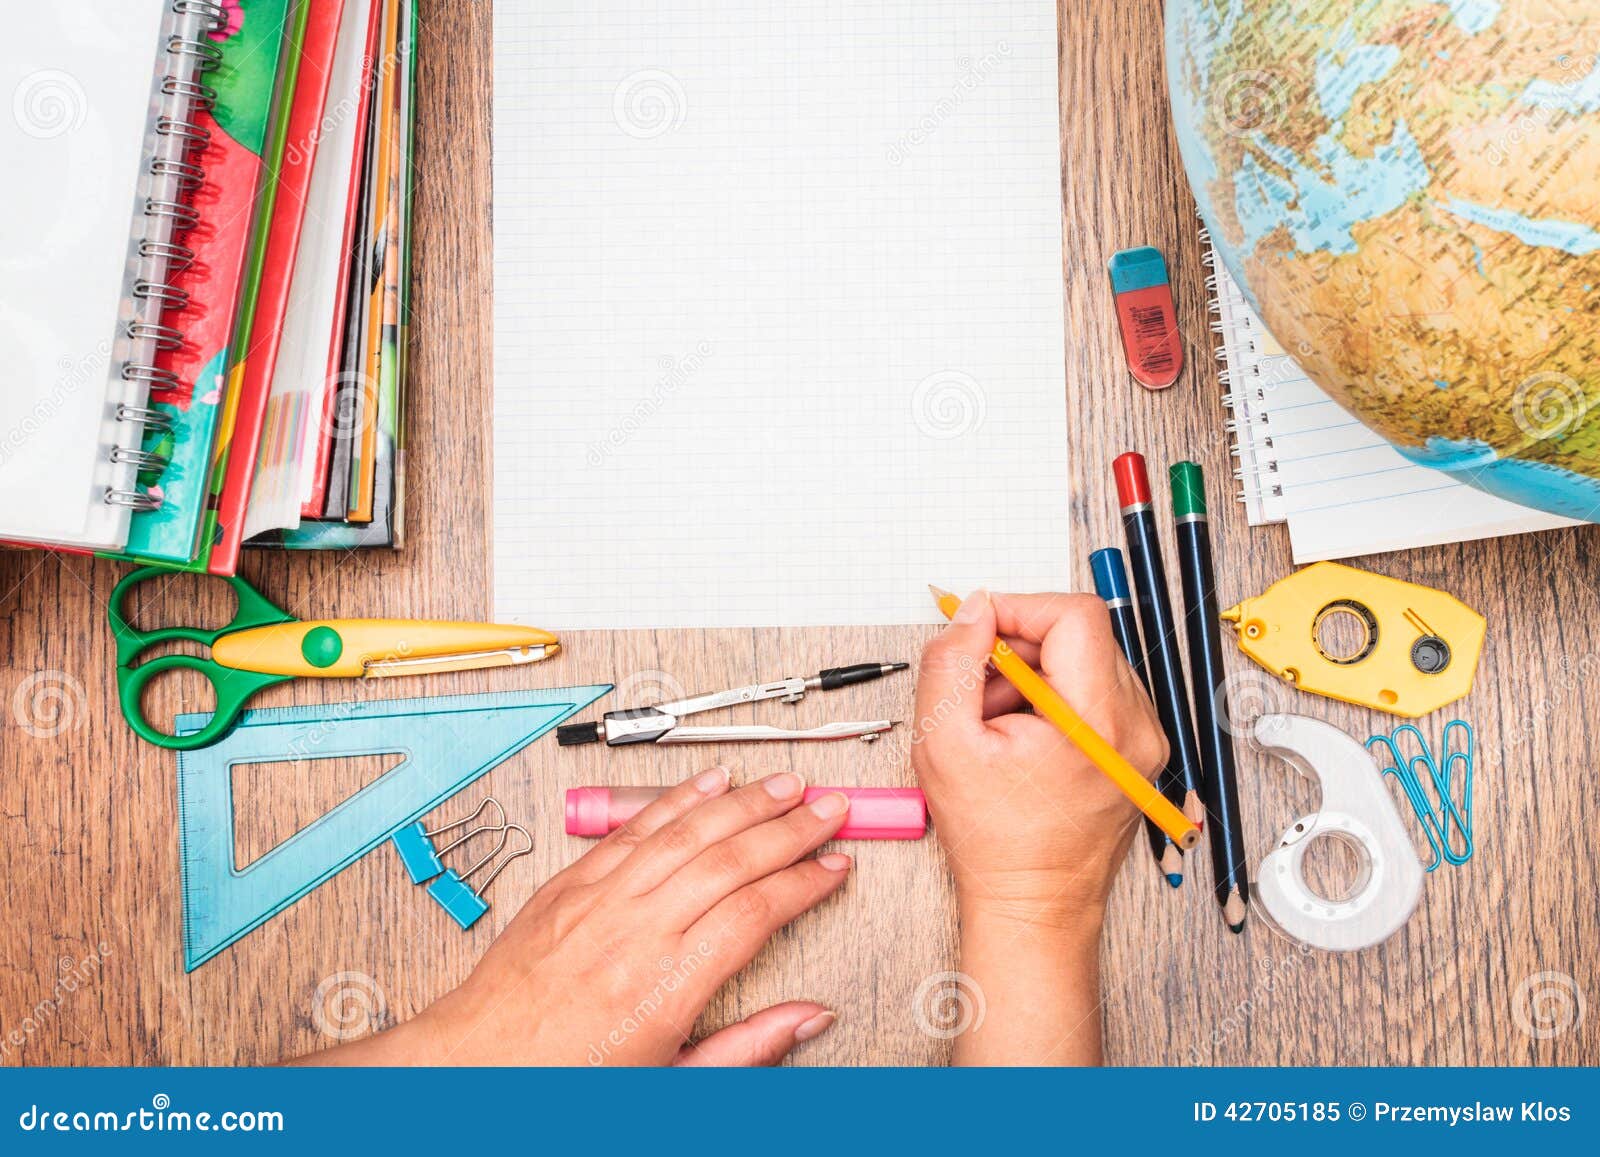 School Accessories on a Desk Stock Image - Image of crayon, gear: 42705185